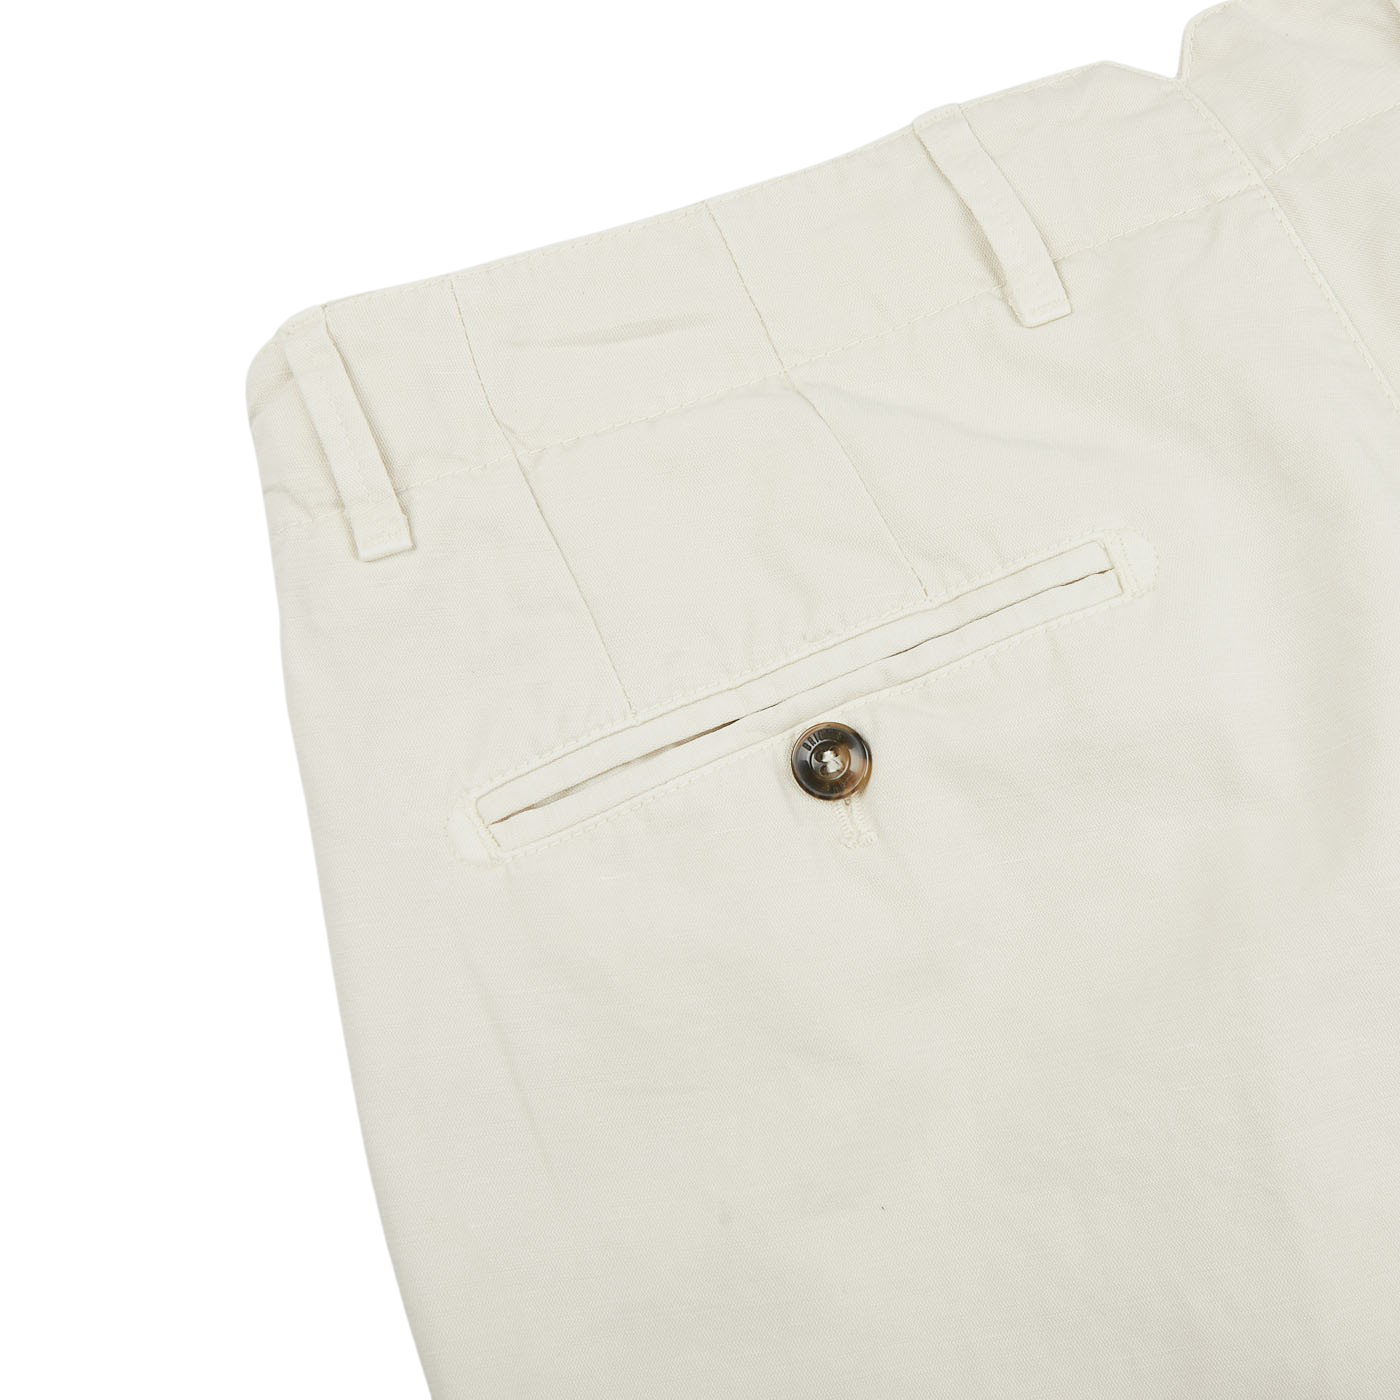 A pair of Ecru Beige Cotton Linen BG59 Pleated Chinos with a button on the side, made by Italian specialist Briglia.